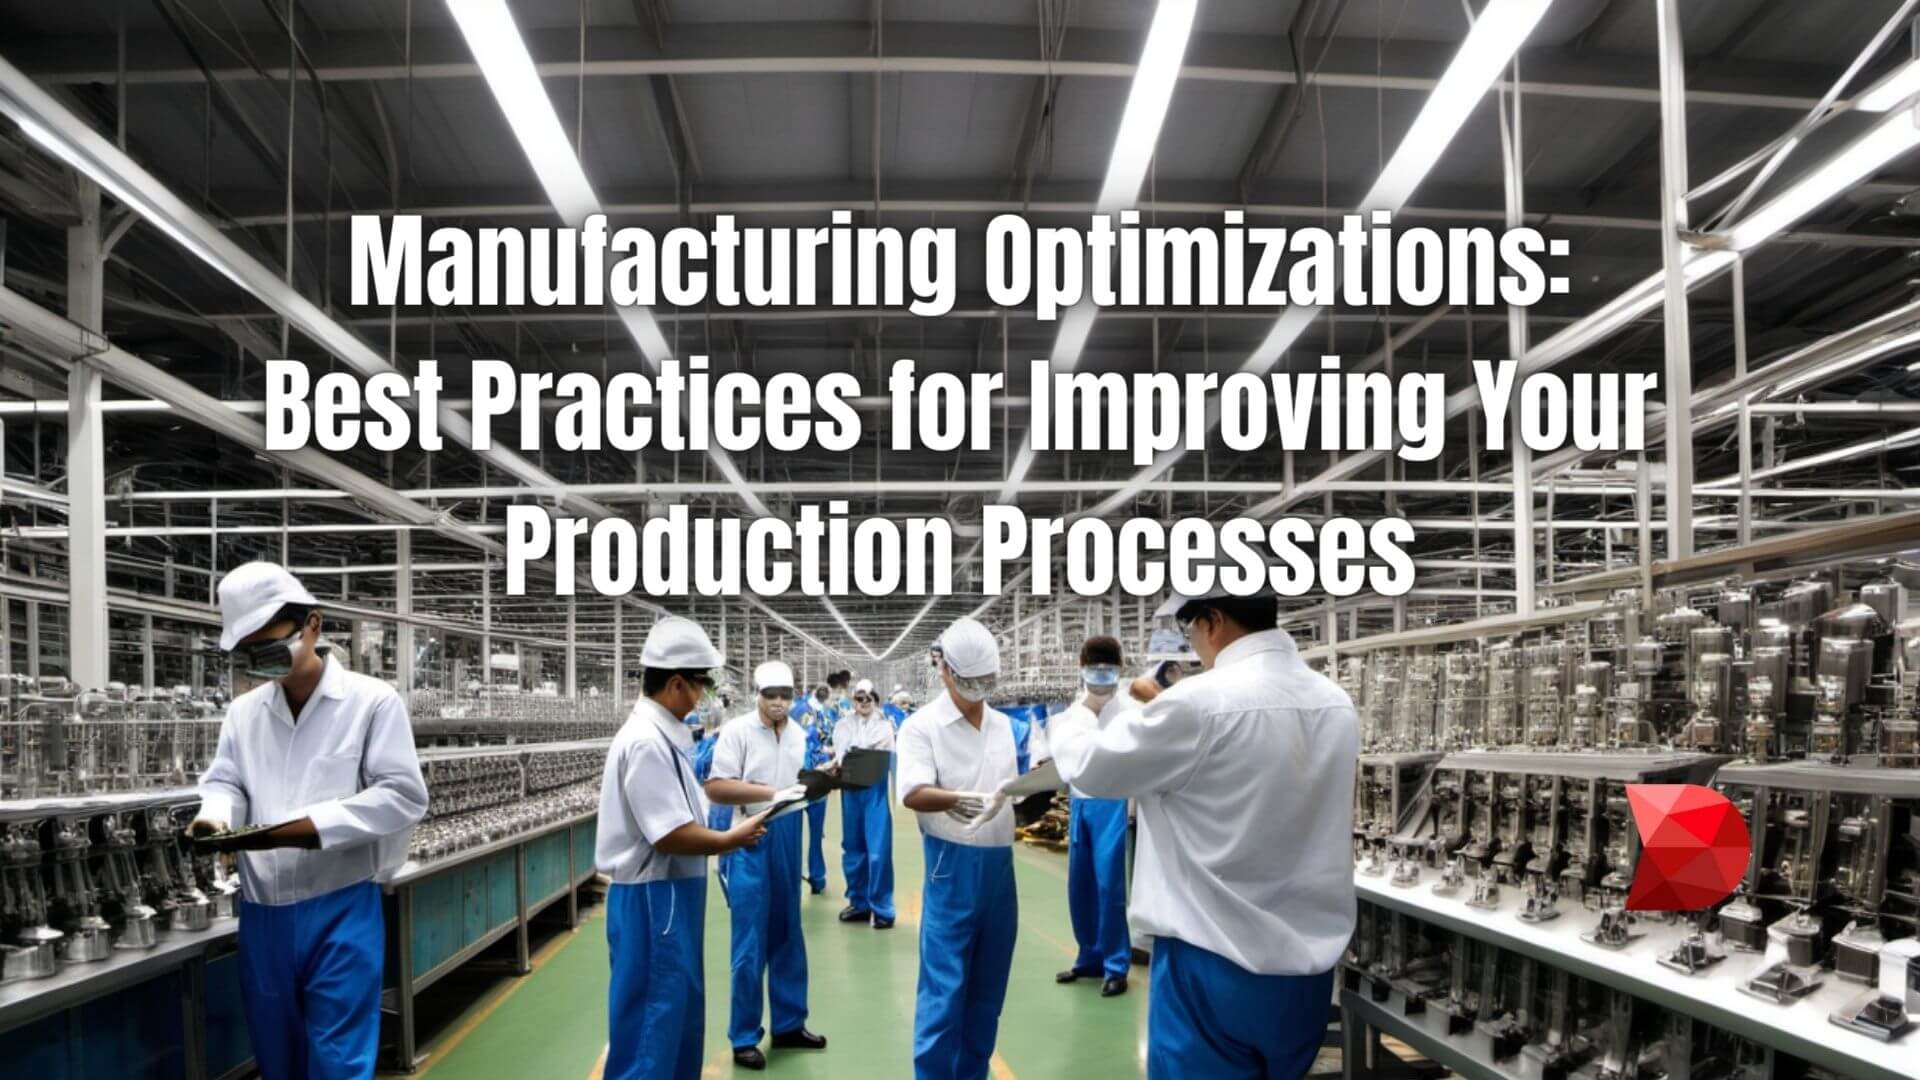 Unlock efficiency with our guide to manufacturing optimizations! Click here to discover top strategies for streamlining production processes.